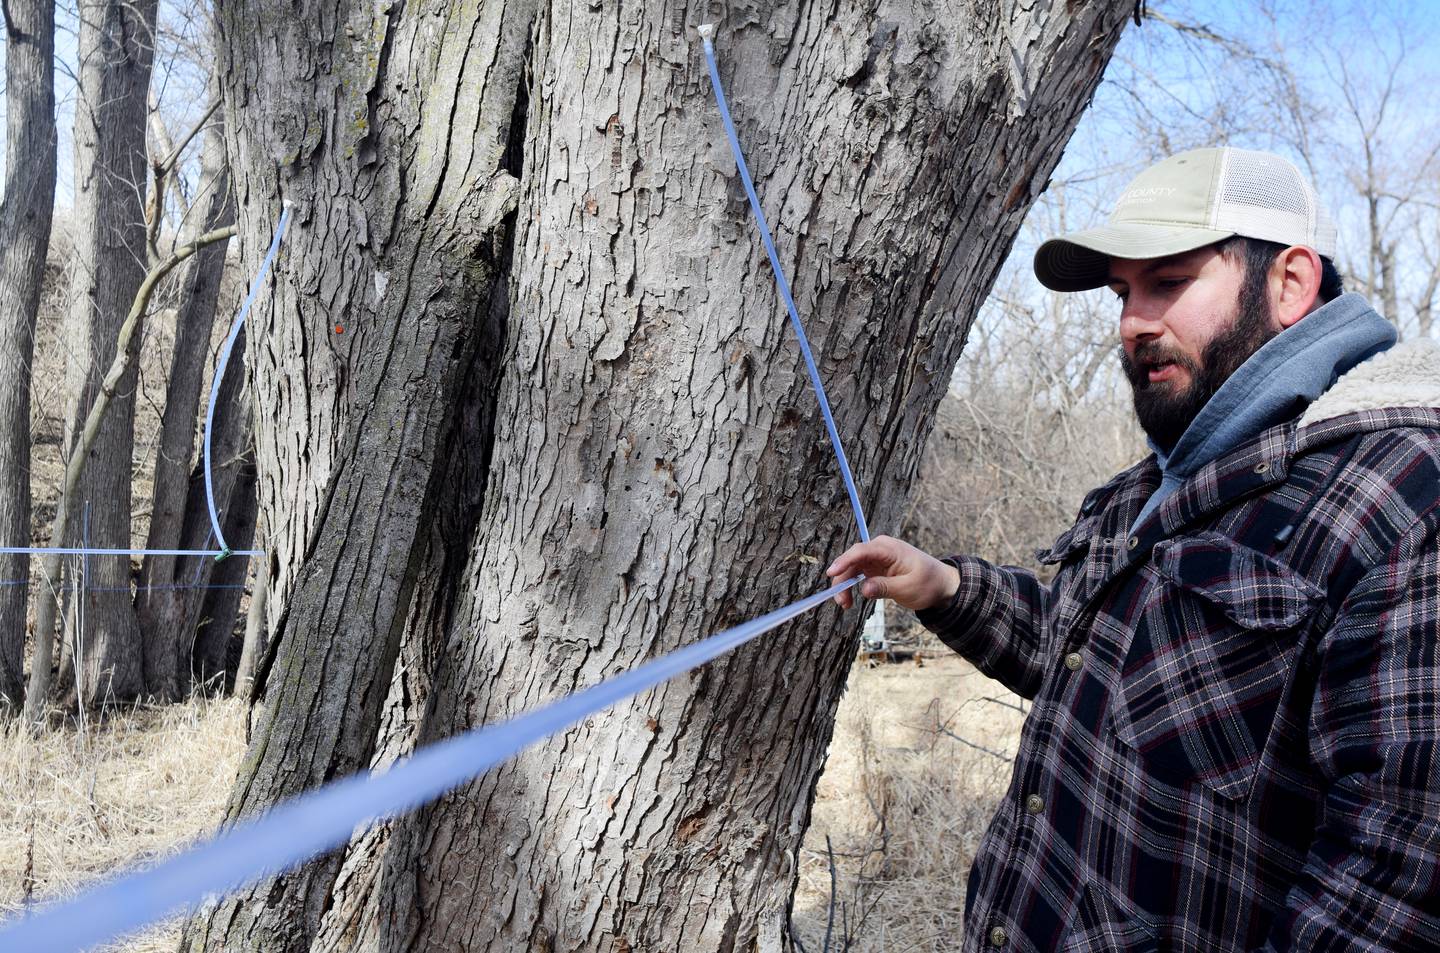 Greg Oldsen, a naturalist for Jasper County Conservation, shows off the suction tubing system at Jacob Krumm Nature Preserve. The system allows staff to extract sap from maple trees very quickly.